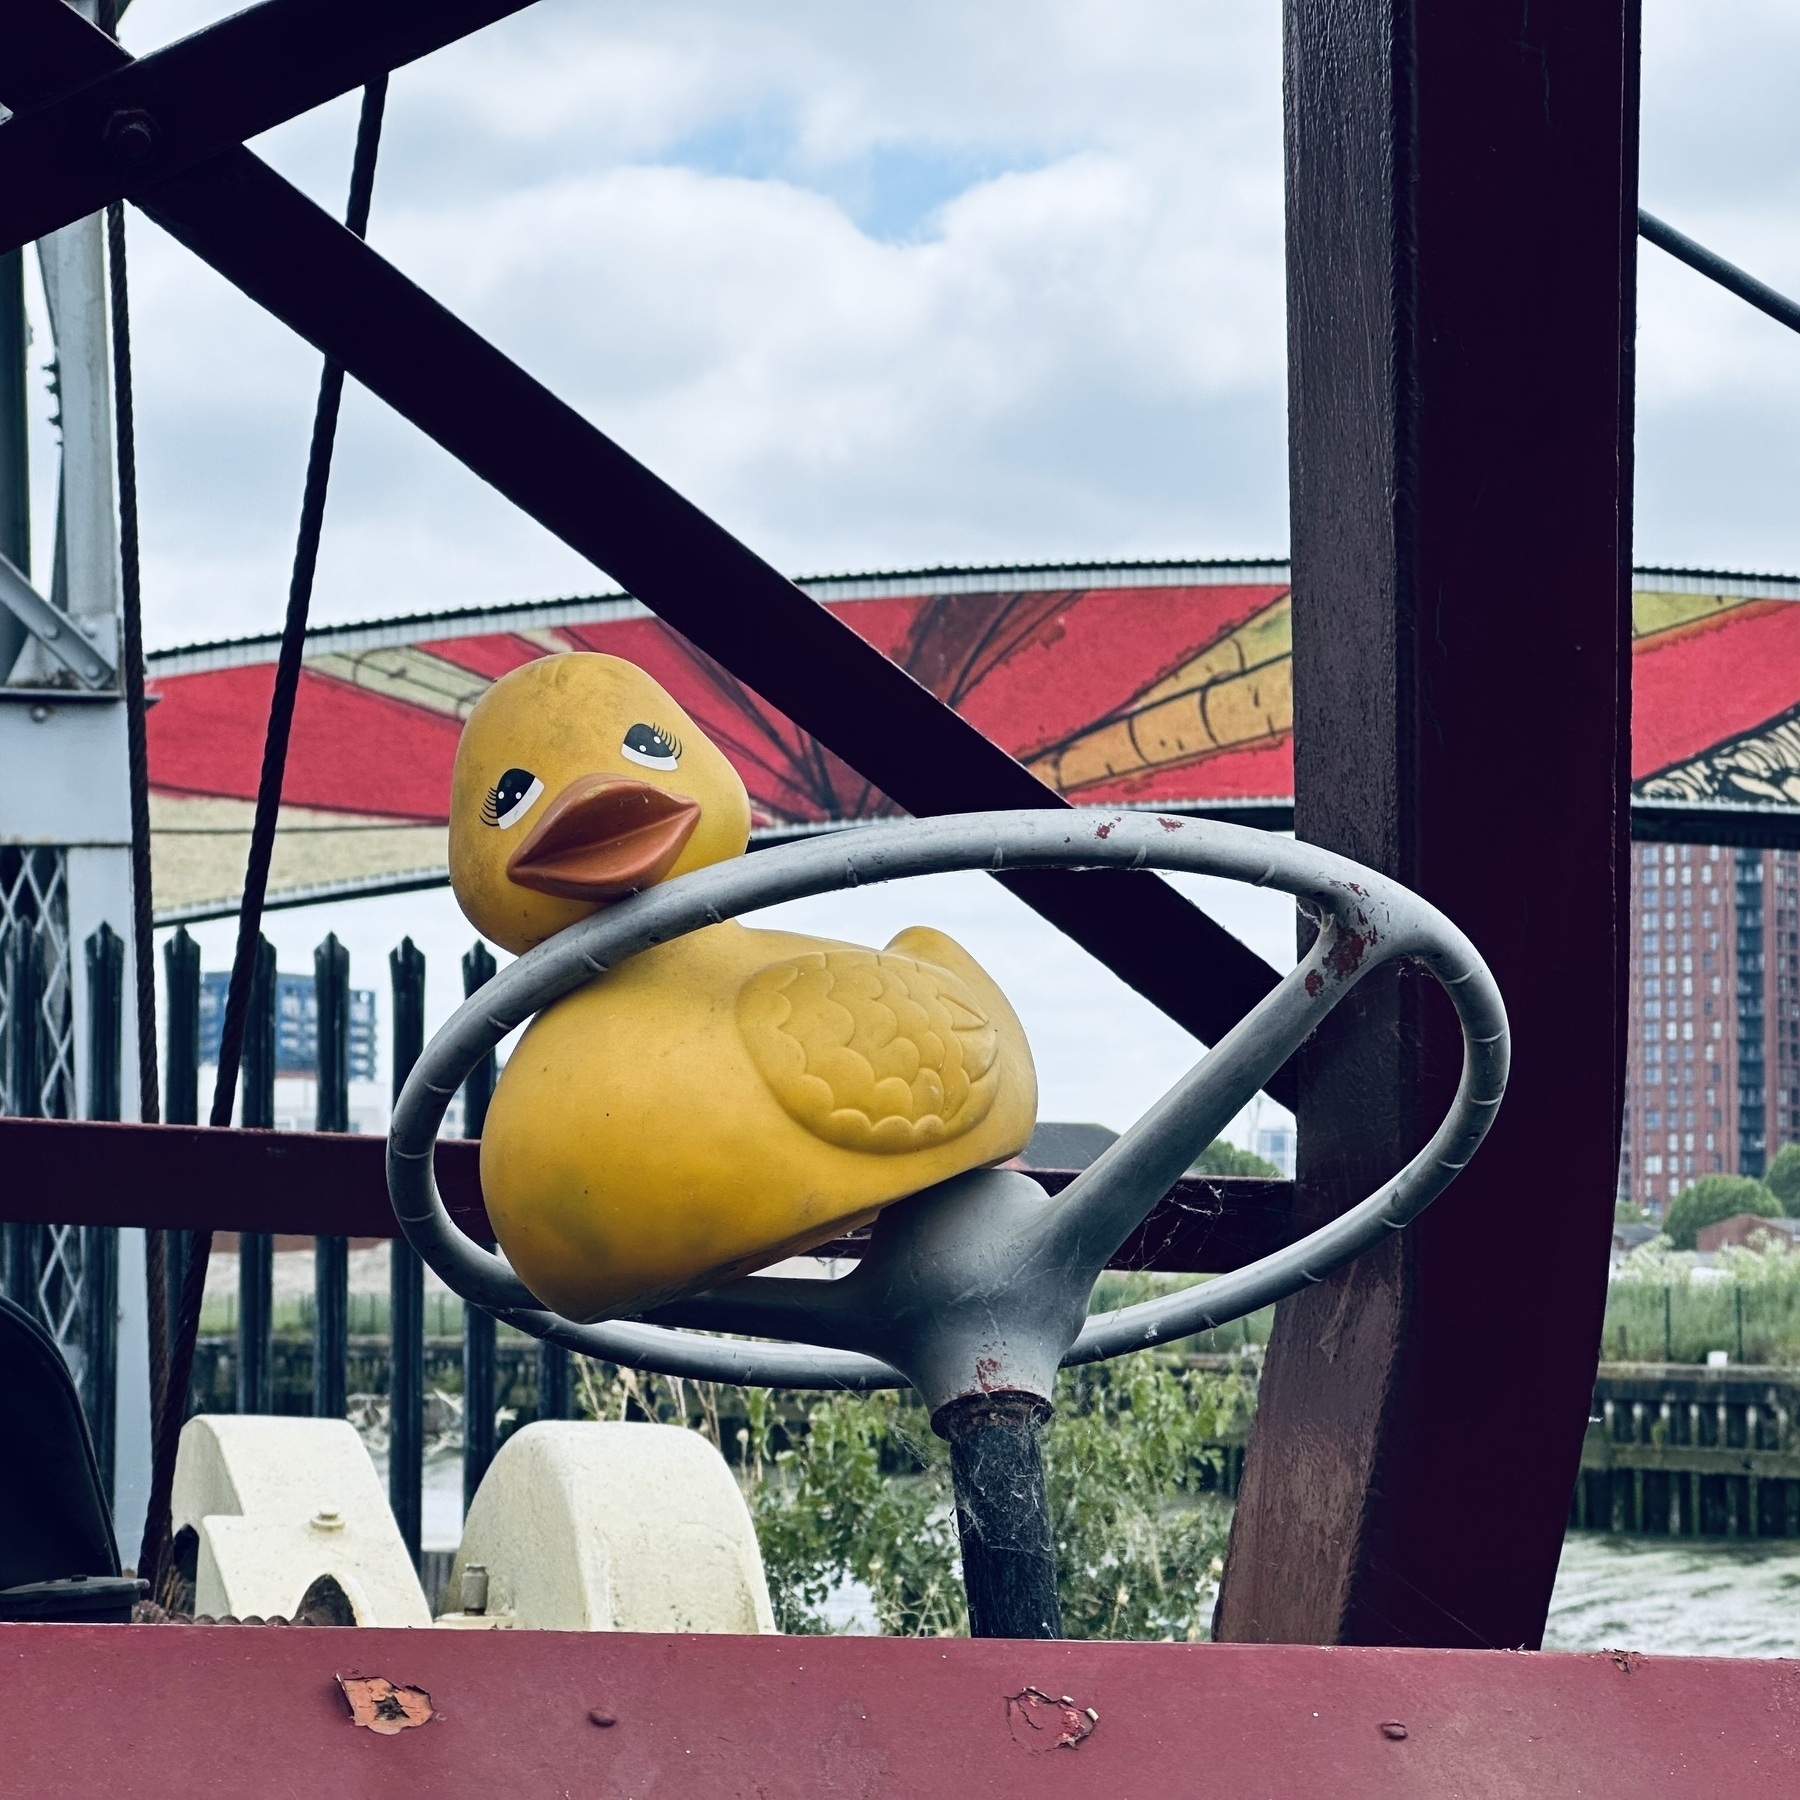 A yellow rubber duck wedged in to the steering wheel of an old crane.